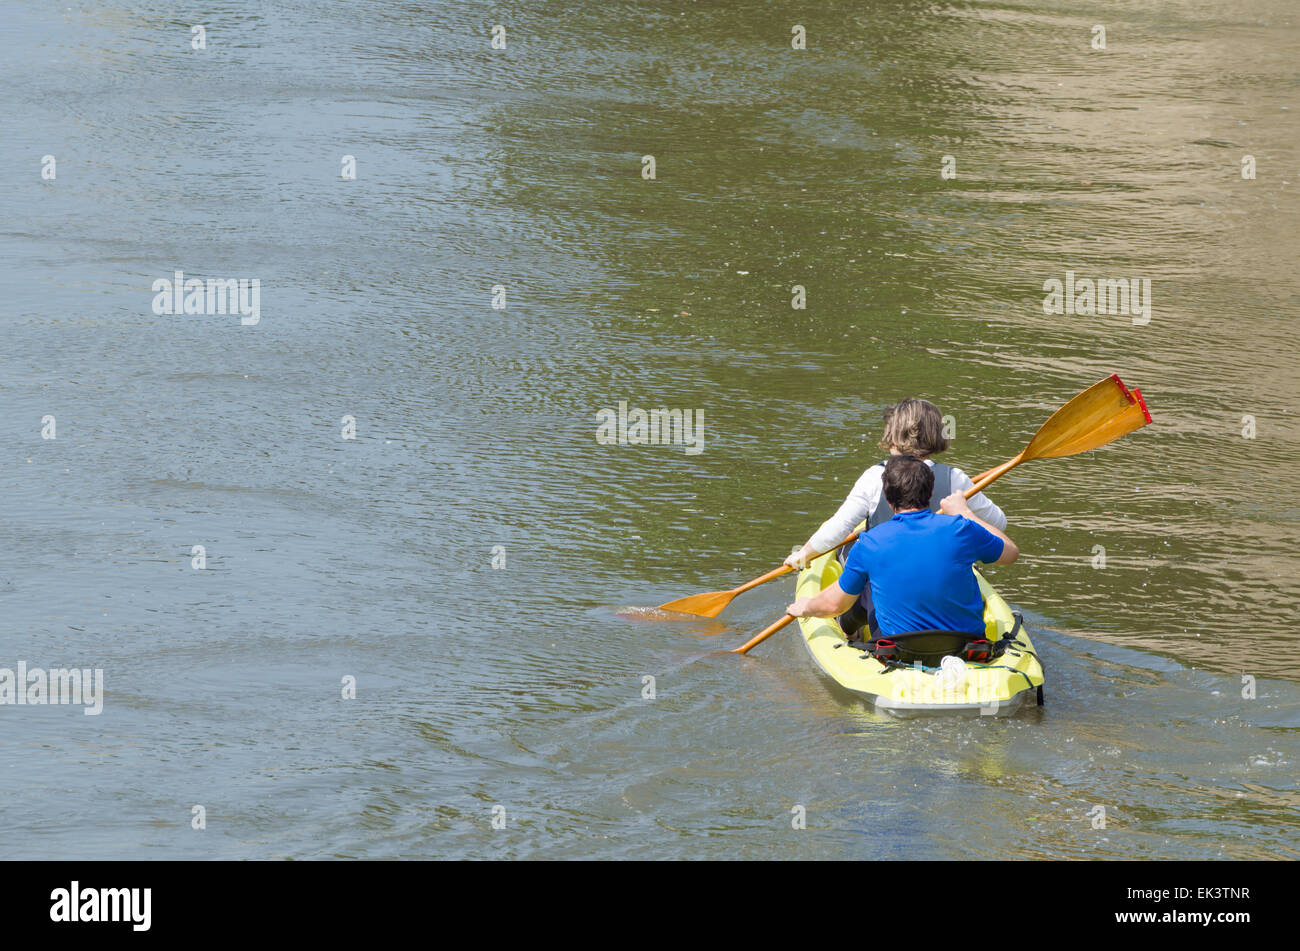 Older Woman and Man in Plastic Canoe on the River Stock Photo